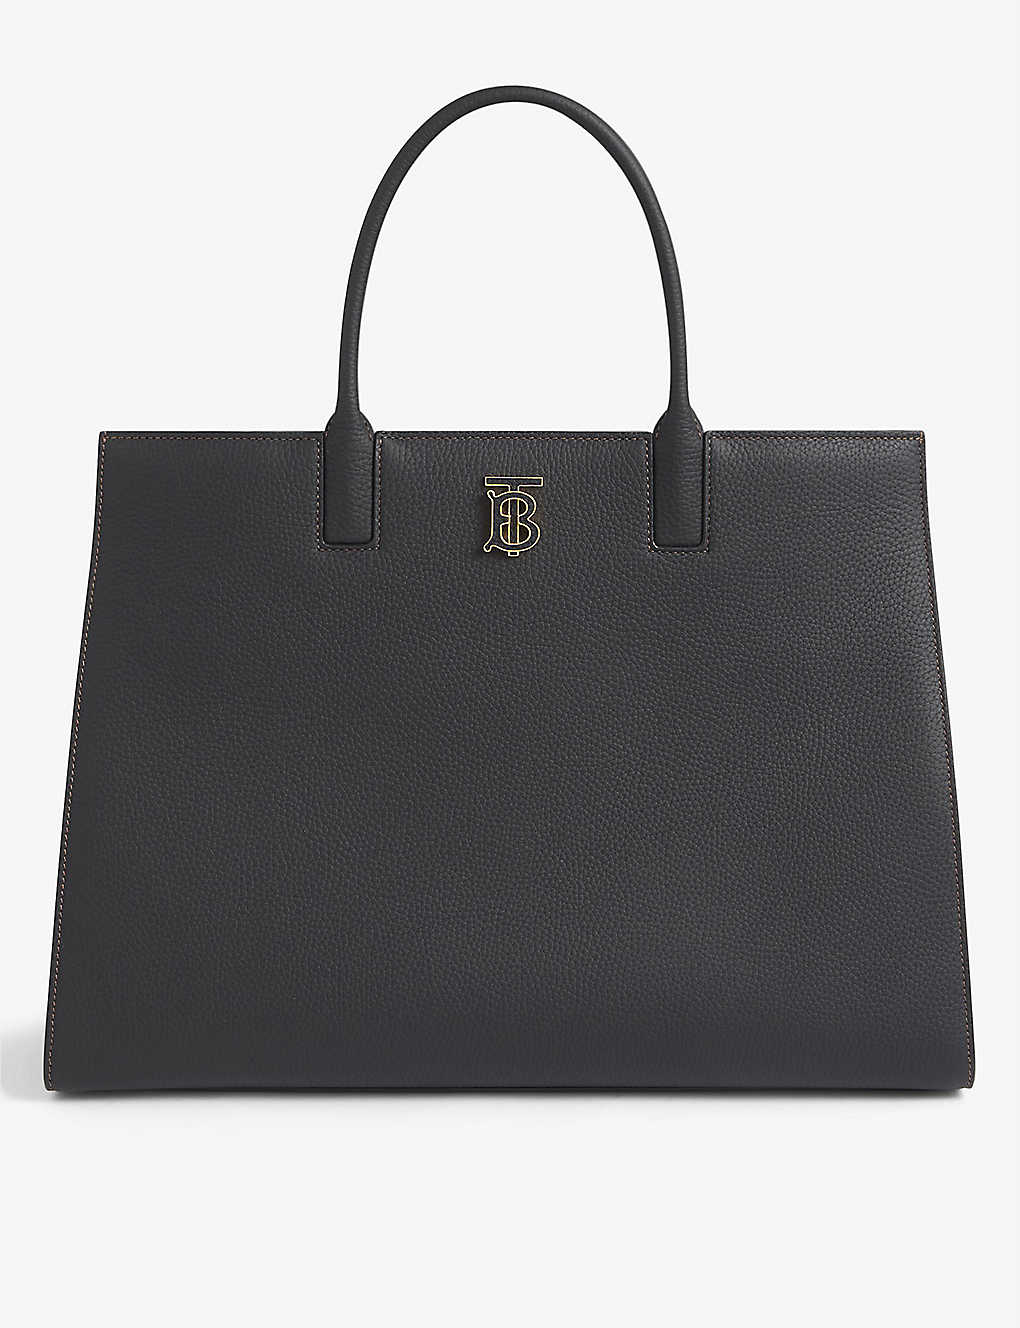 Burberry Frances Large Leather Tote Bag In Black